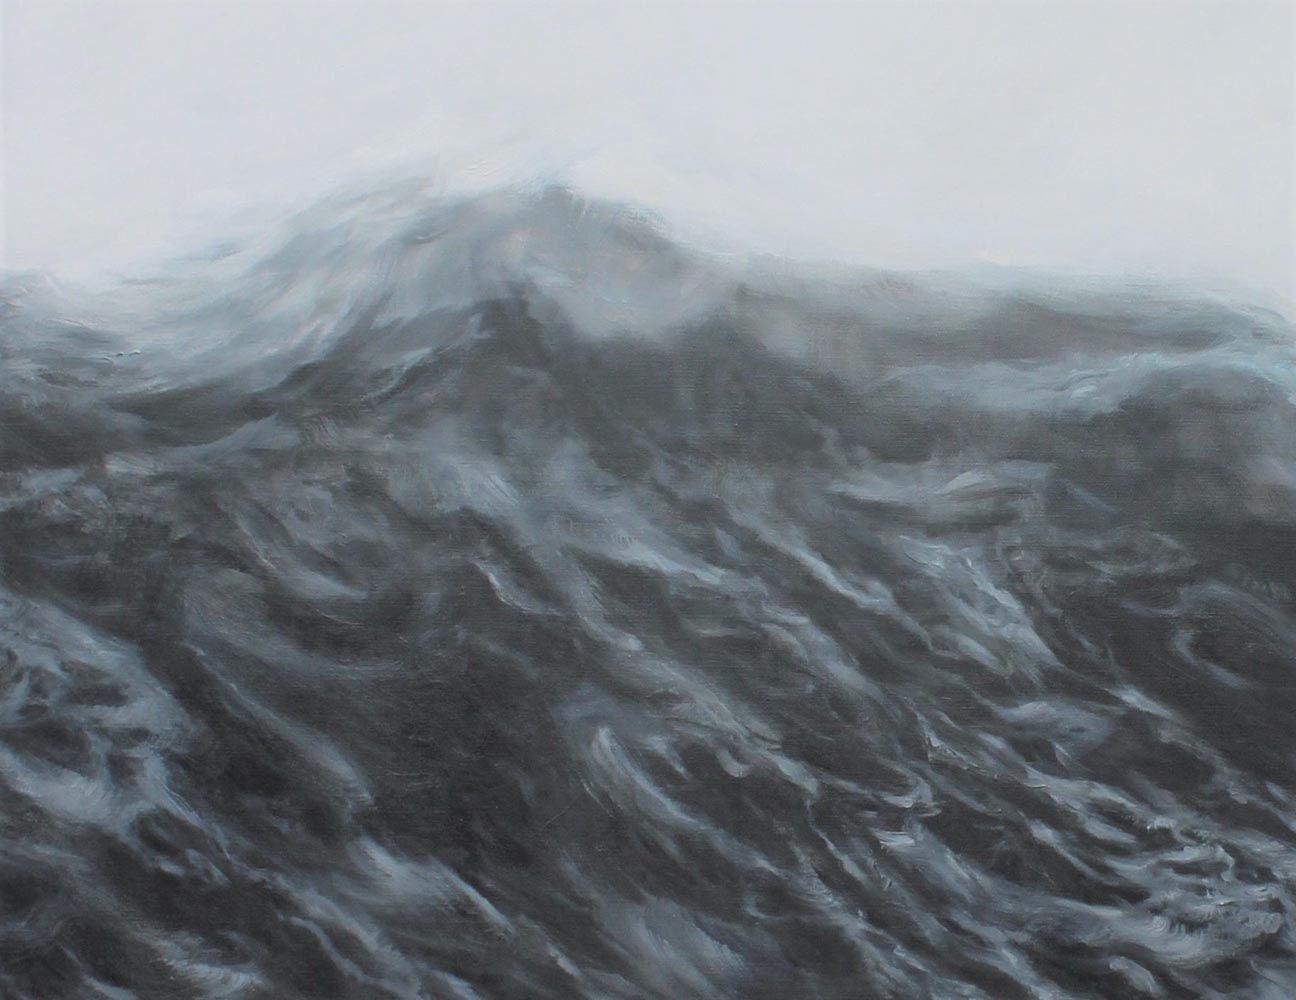 Oil on canvas, 200 cm × 200 cm. Sold unframed.
Focusing his artistic research on the gesture, Chilean-French artists Franco Salas Borquez (b. 1979) paints the waves using an intuitive but rigorous hand to achieve the same degree of fluidity as the